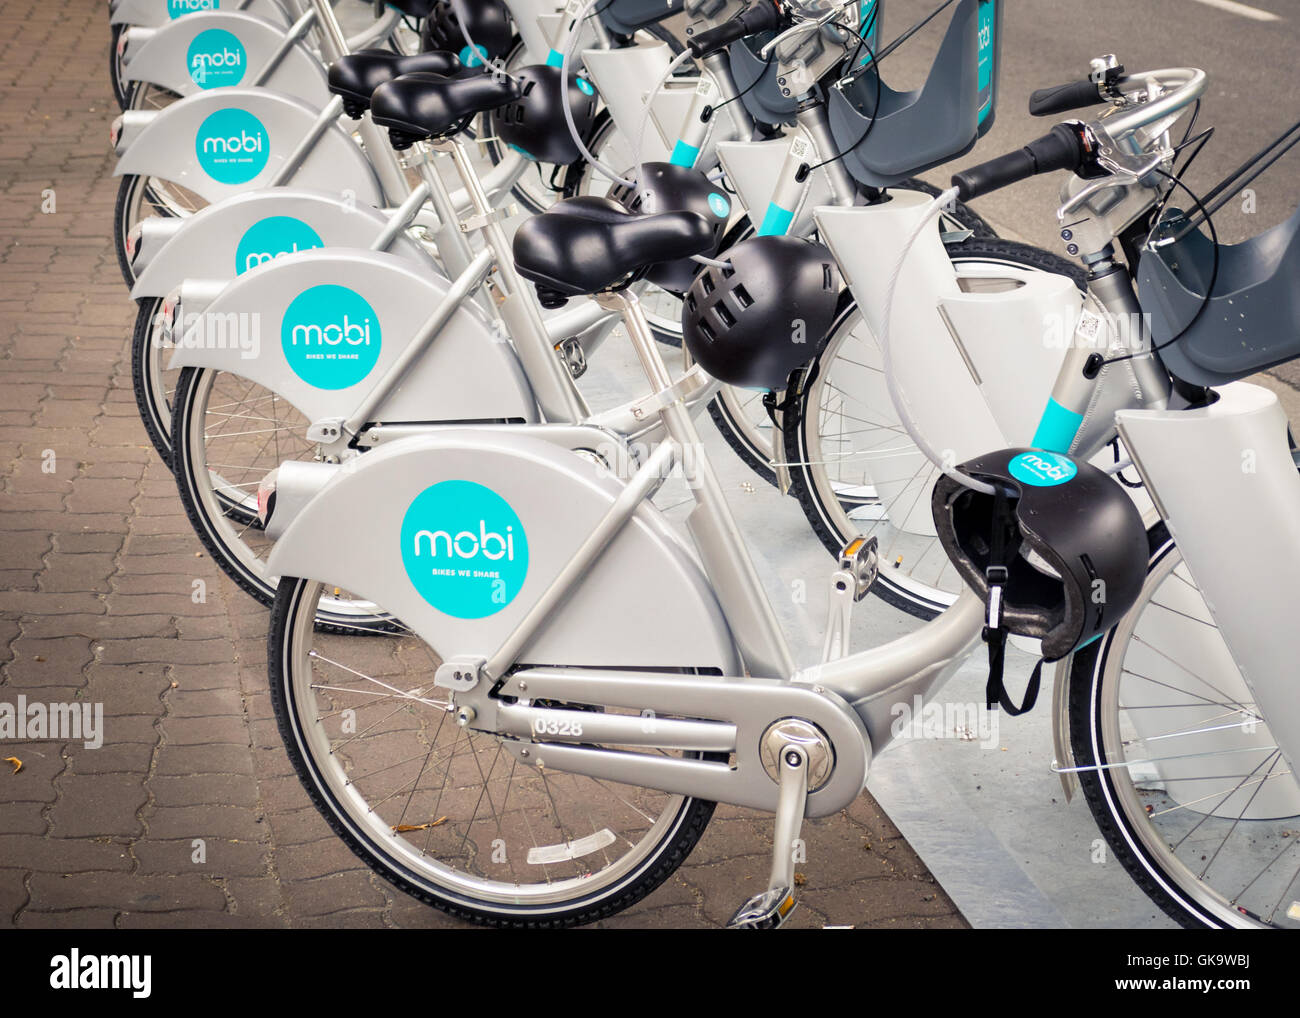 Mobi bicycles on Anderson Street.  Mobi Bike Share is the City of Vancouver's bicycle sharing program. Stock Photo